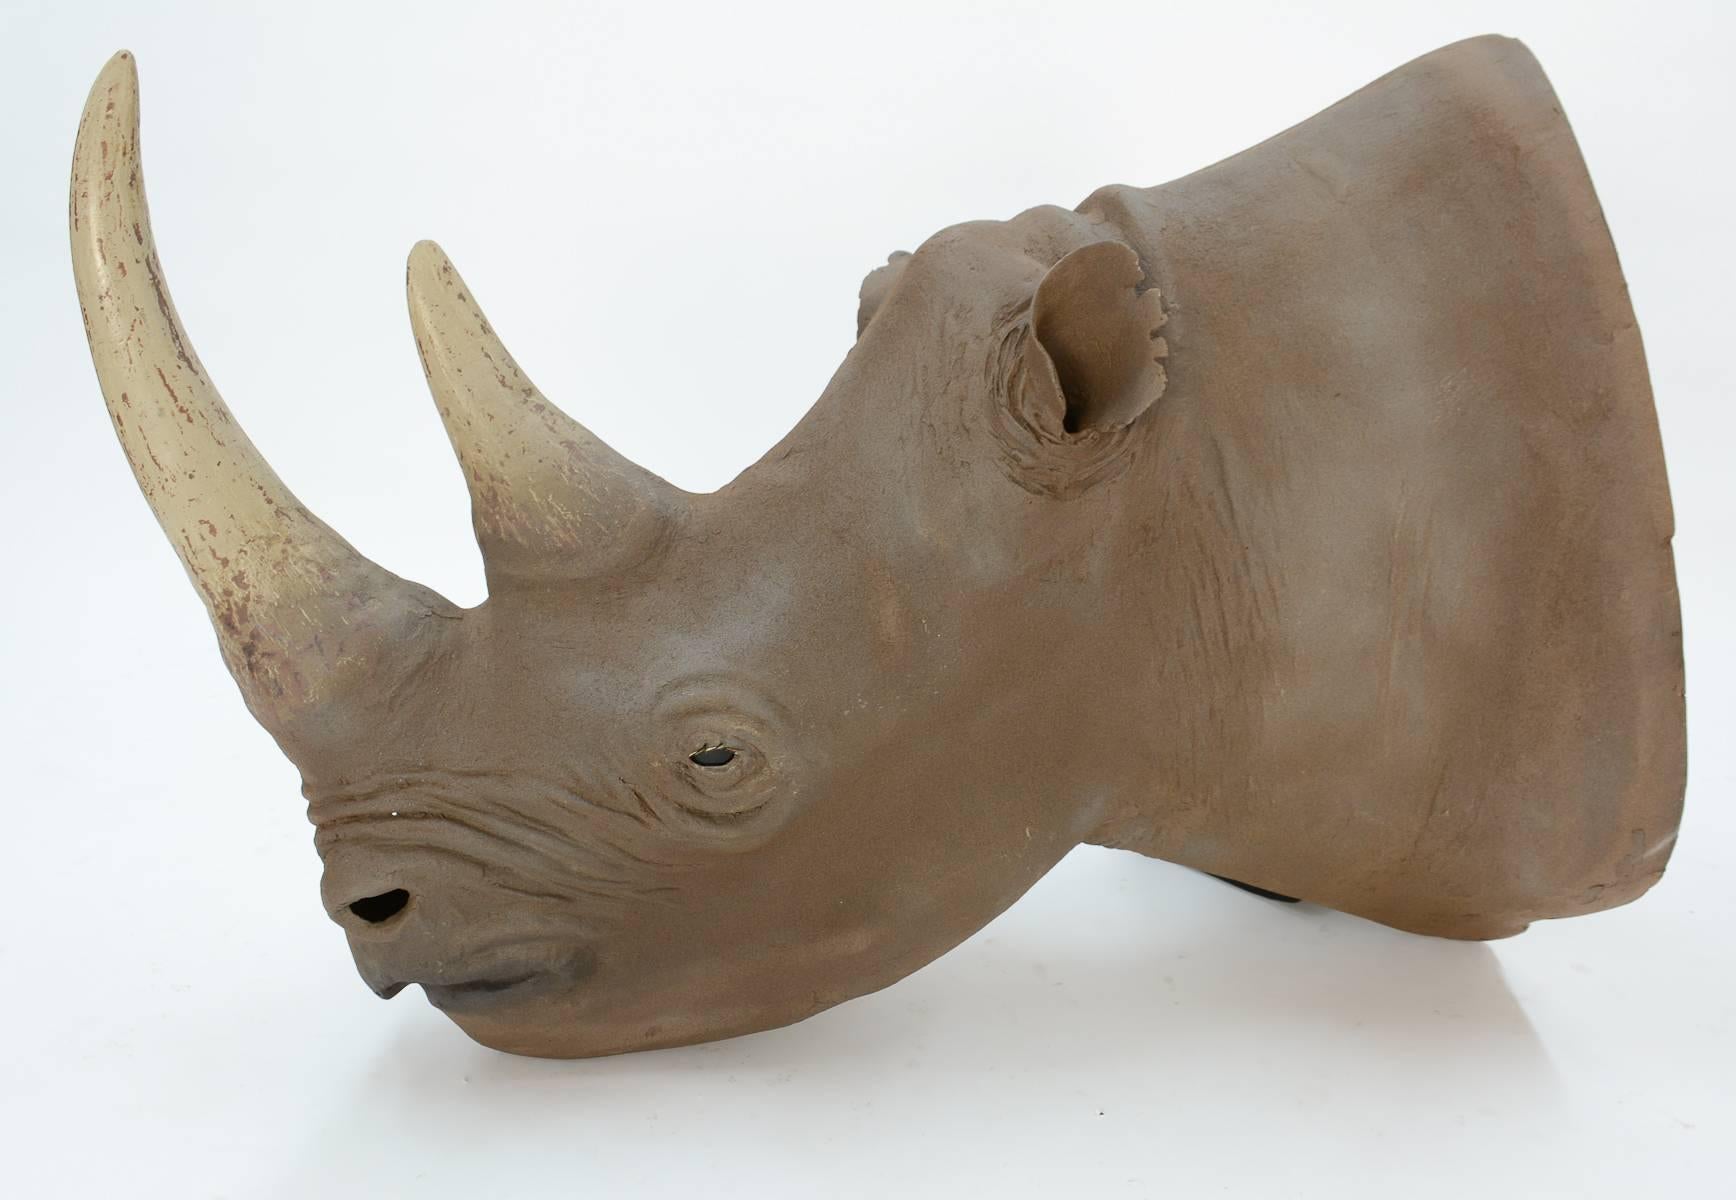 This beauty is a 1950s full scale model of an African black rhino. It is wonderfully detailed and a fun conversation piece. It has been in a private collection since 1952 and was brought back from the UK. It is made of fiberglass and no harm came to